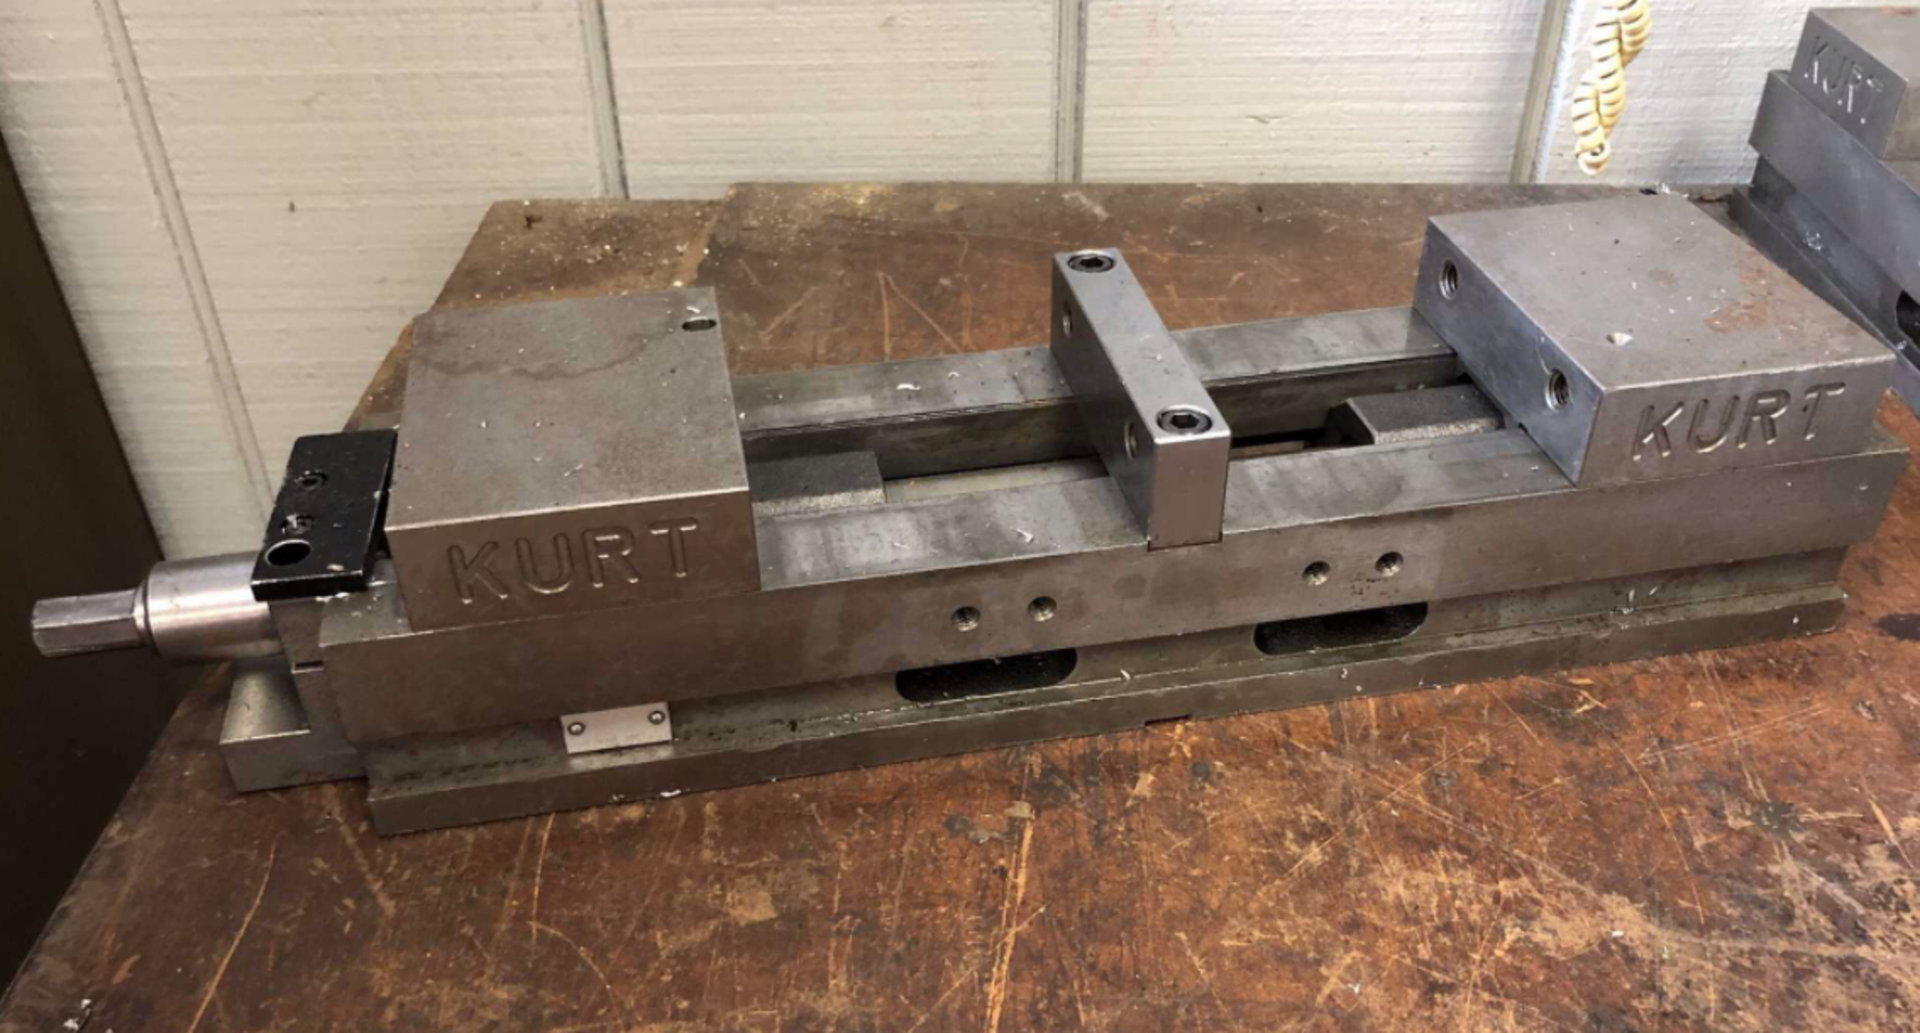 Kurt 4" Precision Machinists' Vise with Center Block (includes handle not shown in photo)